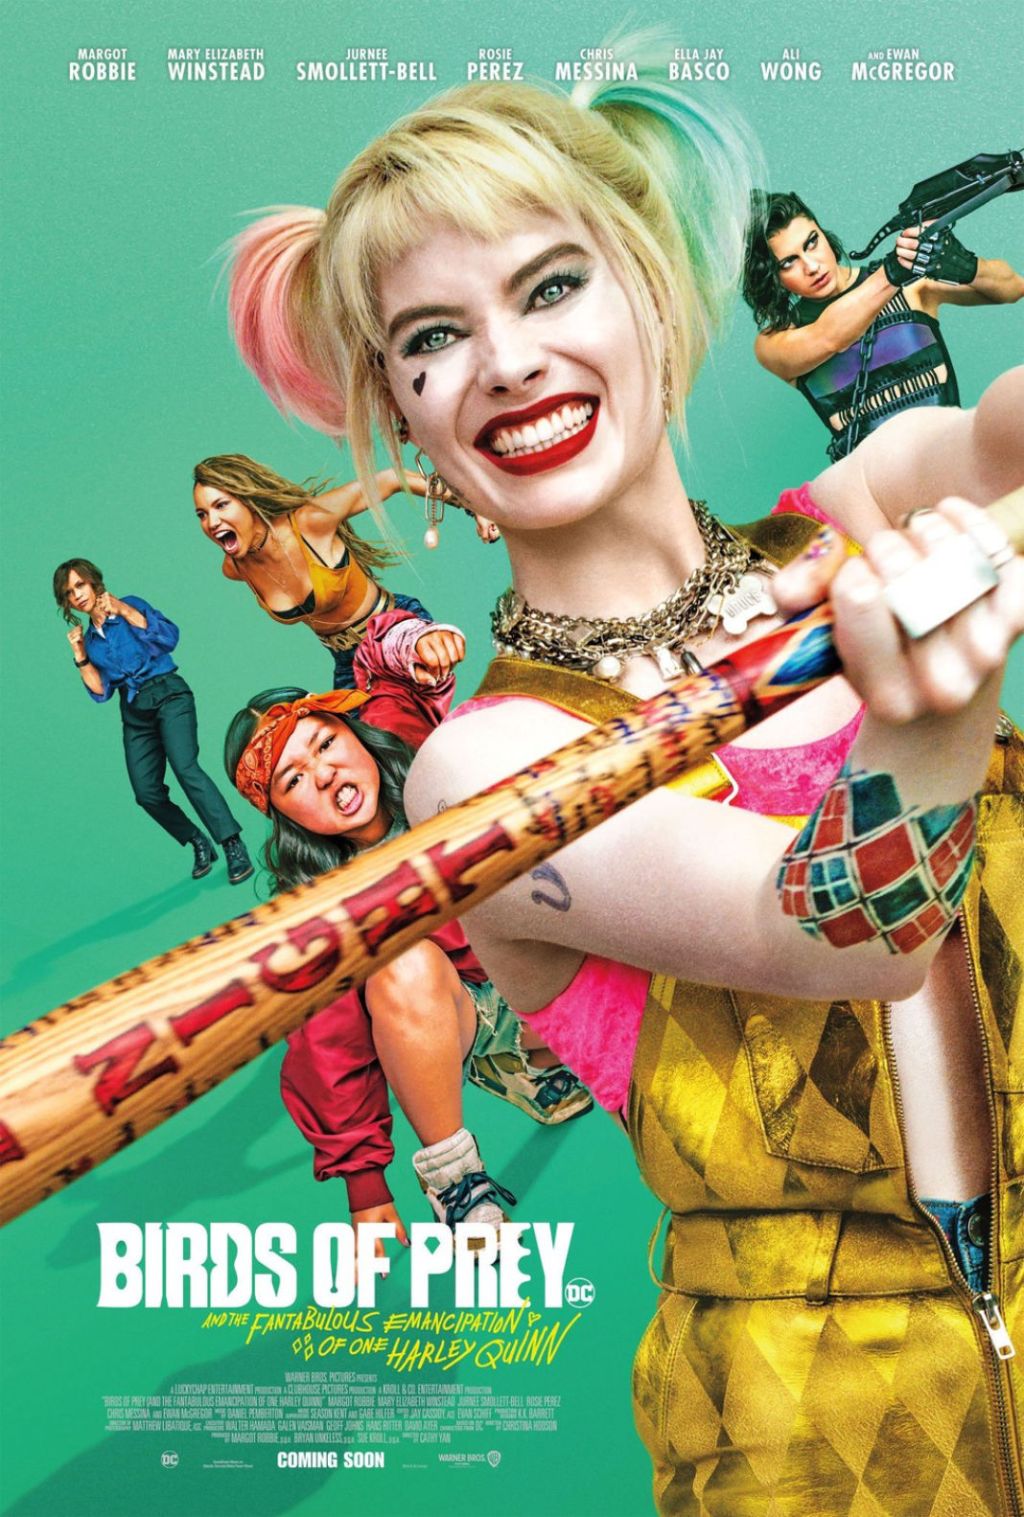 Birds of Prey (and the Fantabulous Emancipation of one Harley Quinn) Review